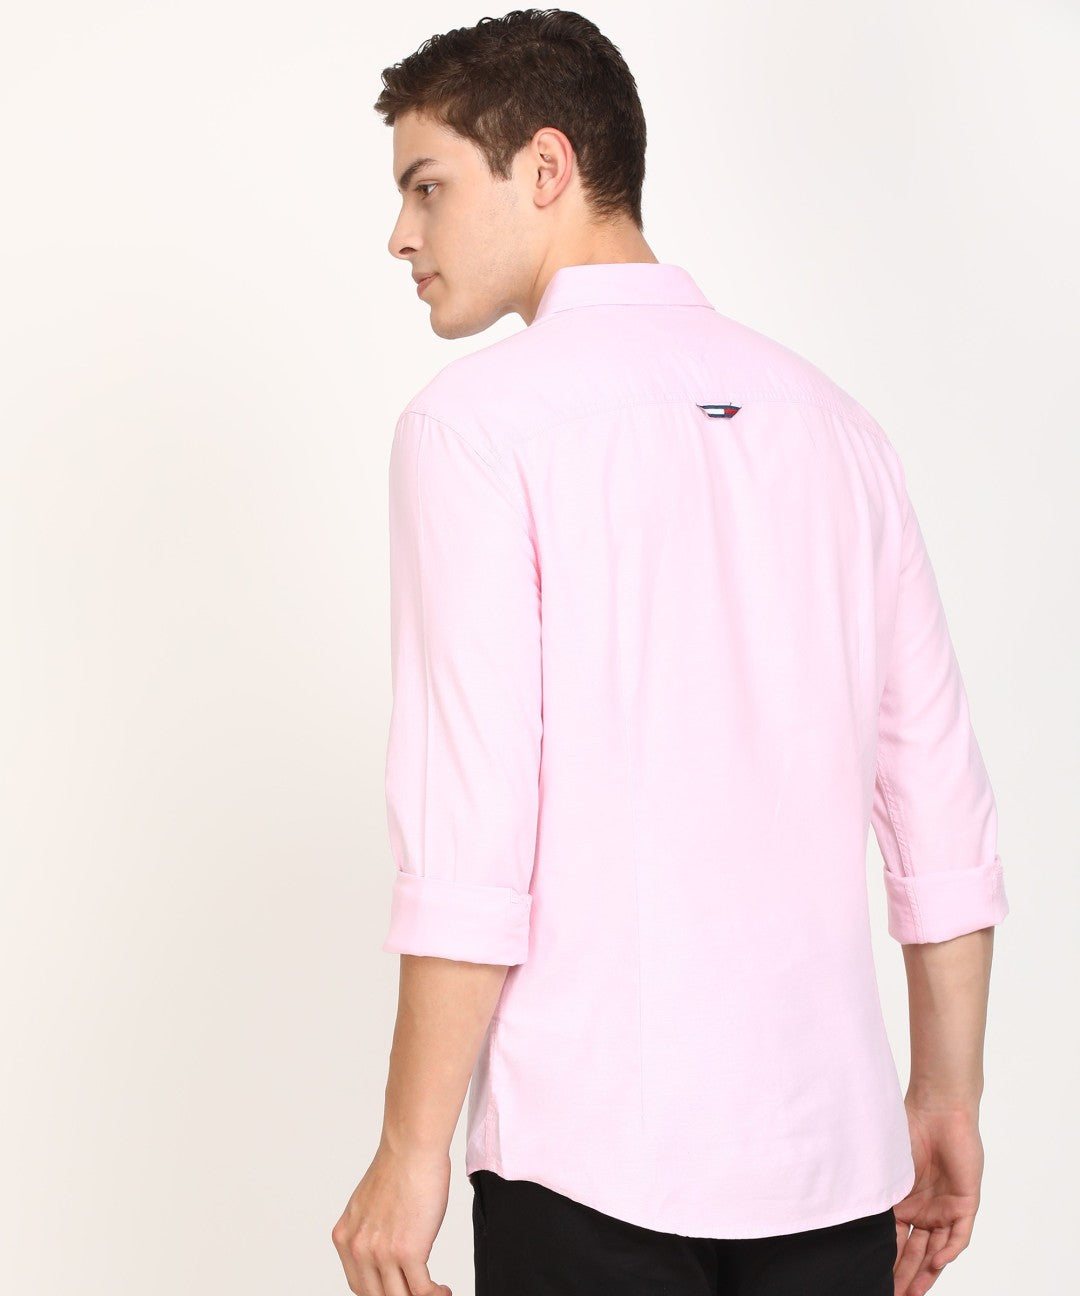 TOMMY HILFIGER OXFORD COTTON SOLID PINK - SHIRT